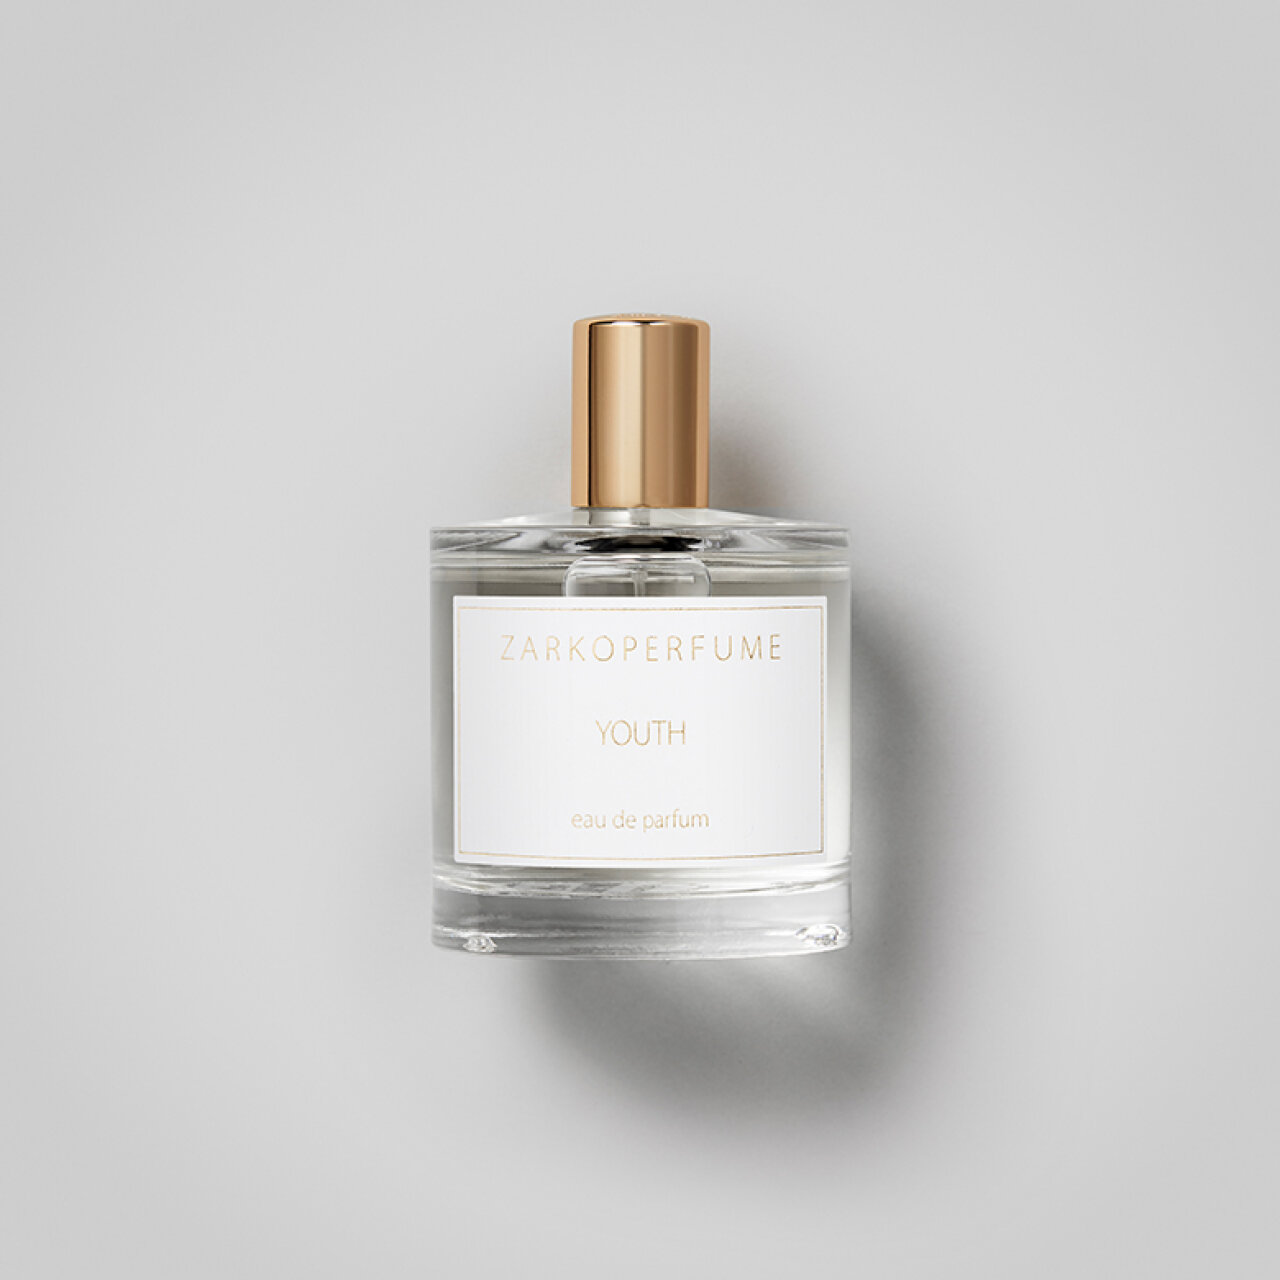 YOUTH — Official webshop for ZARKOPERFUME